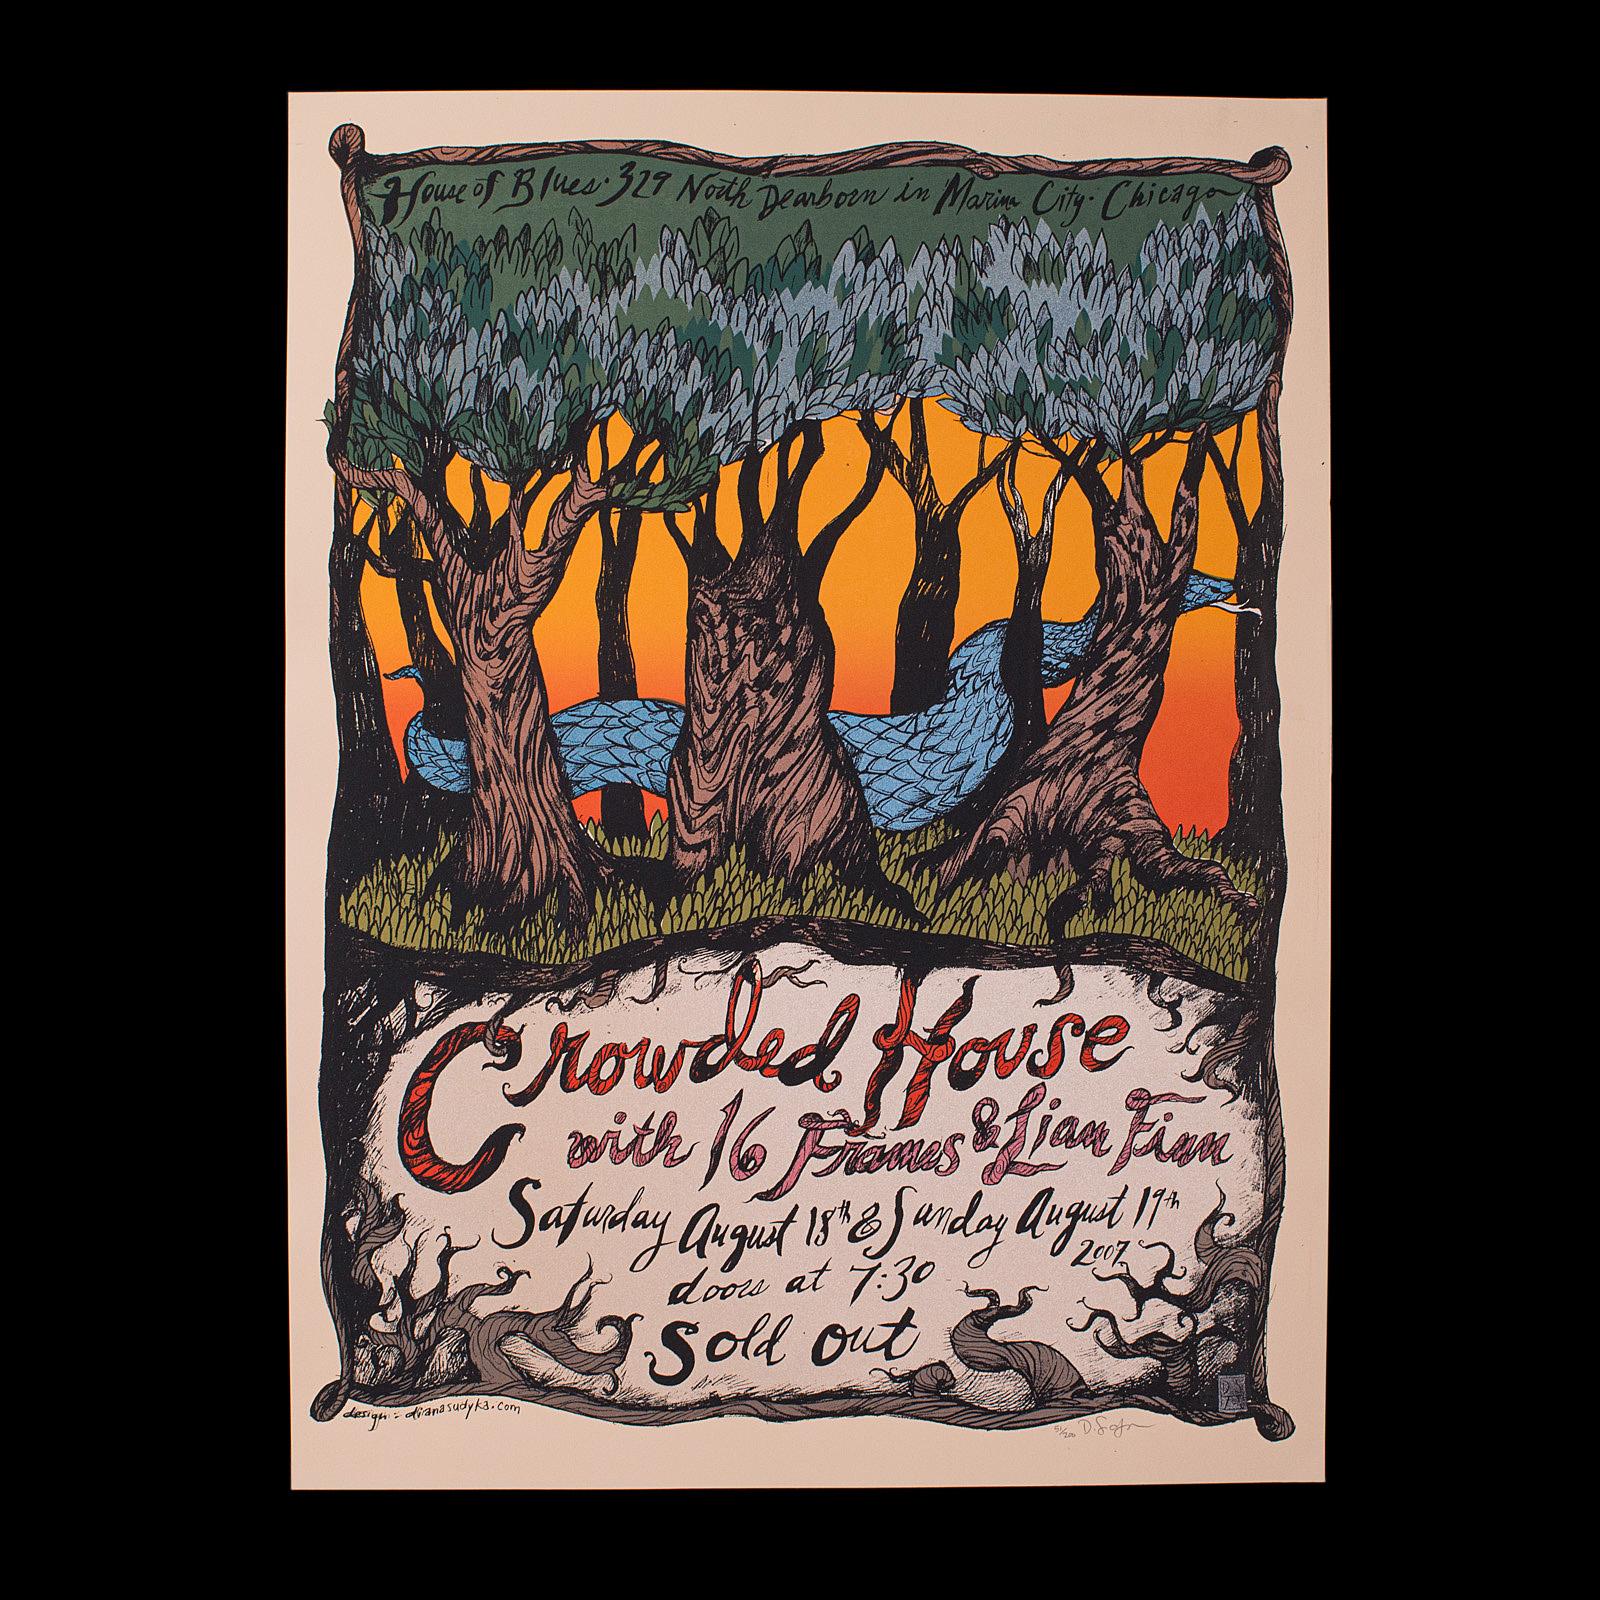 This is a decorative concert screenprint for Crowded House. An American, event art poster on paper stock, individually numbered and artist signed, dated 2007.

Wonderfully decorated with great colour and distinctive motif
In gallery exhibition